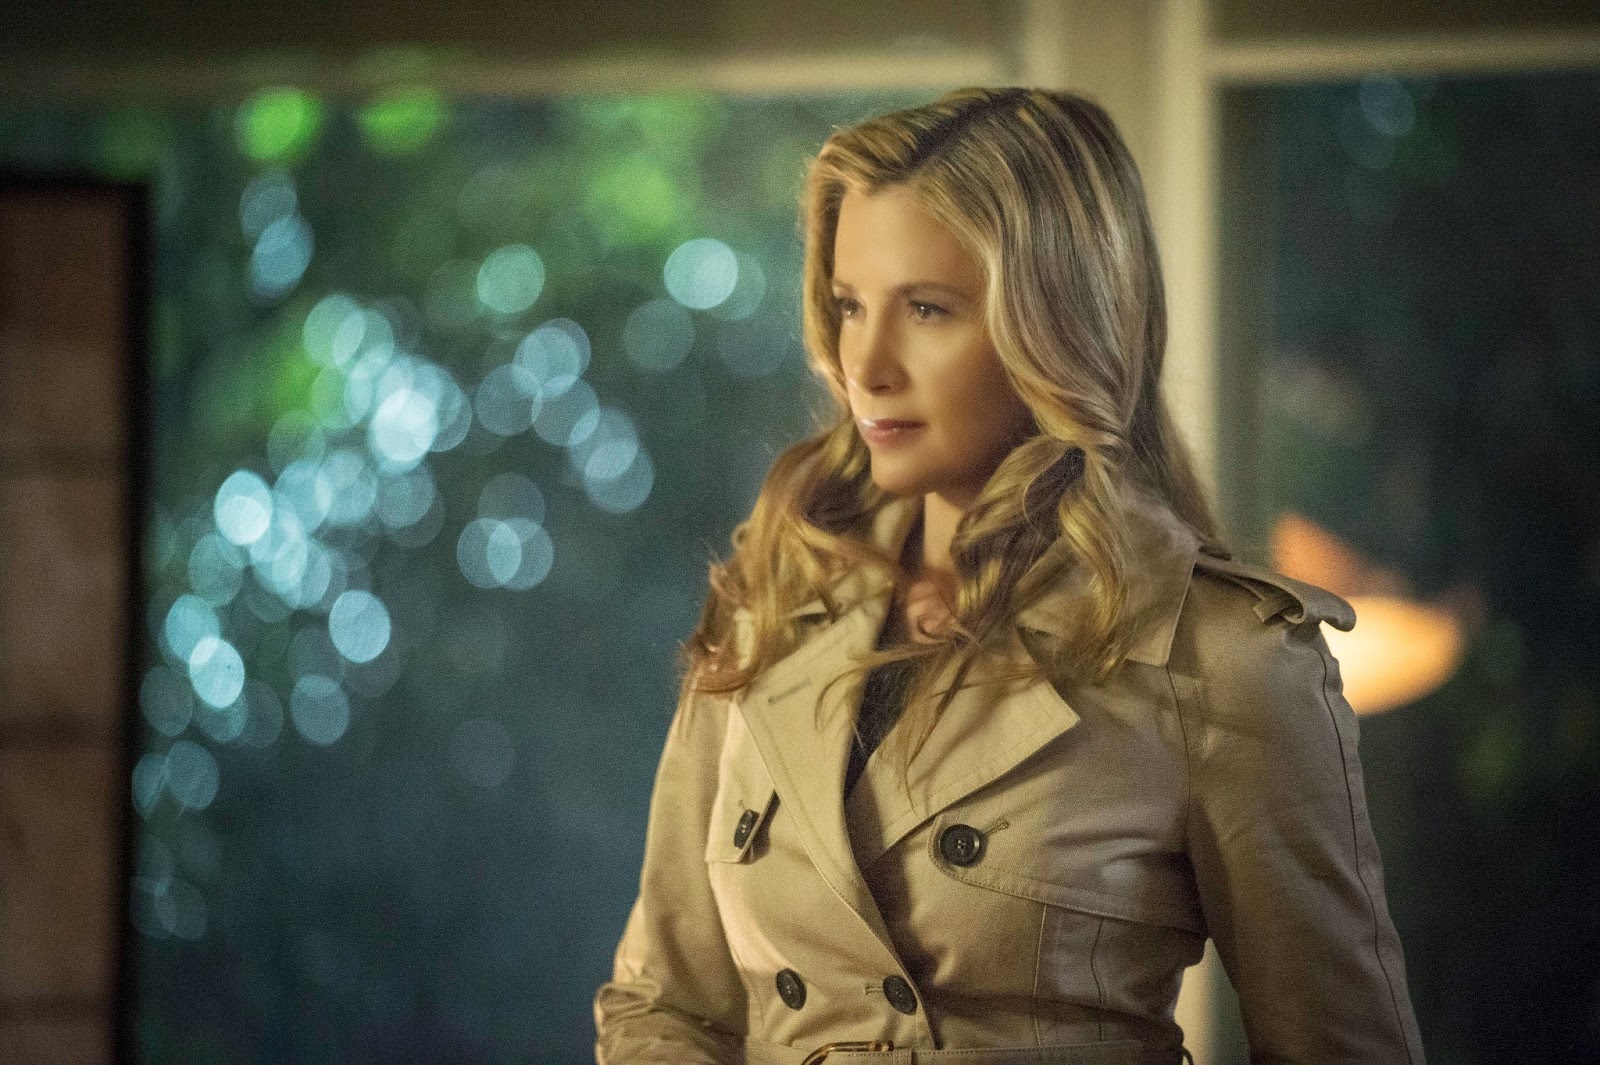 Intruders - Bound - Review: "You Can't Trust Anyone" 